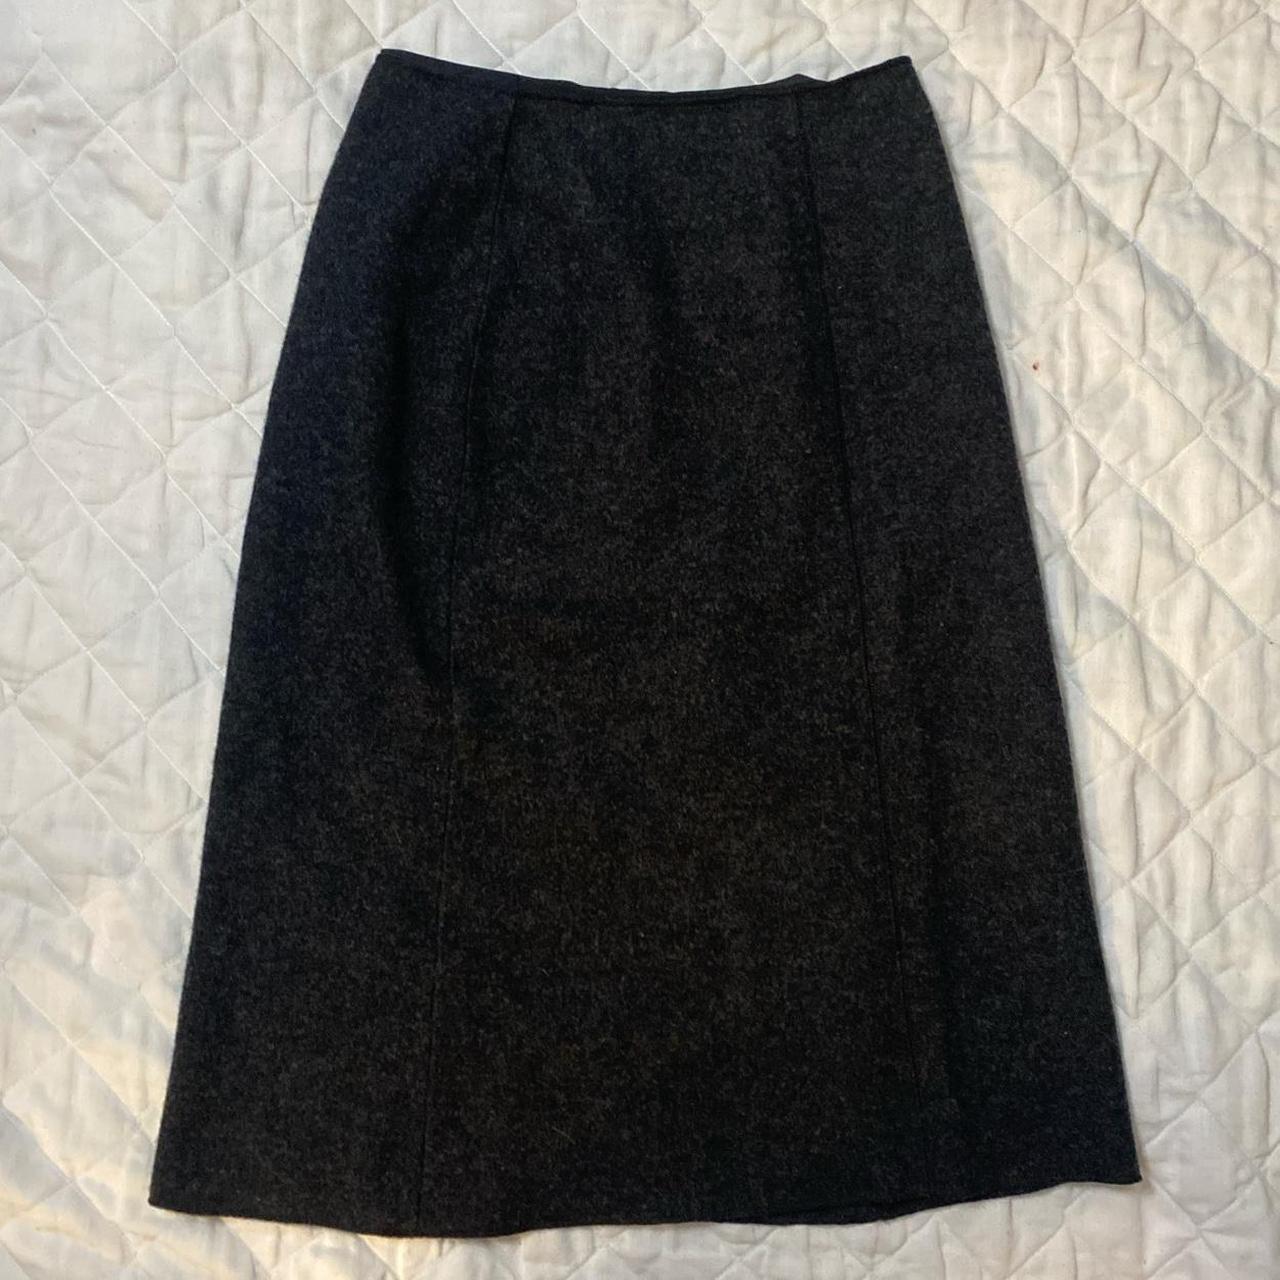 Country Road Women's Grey and Black Skirt